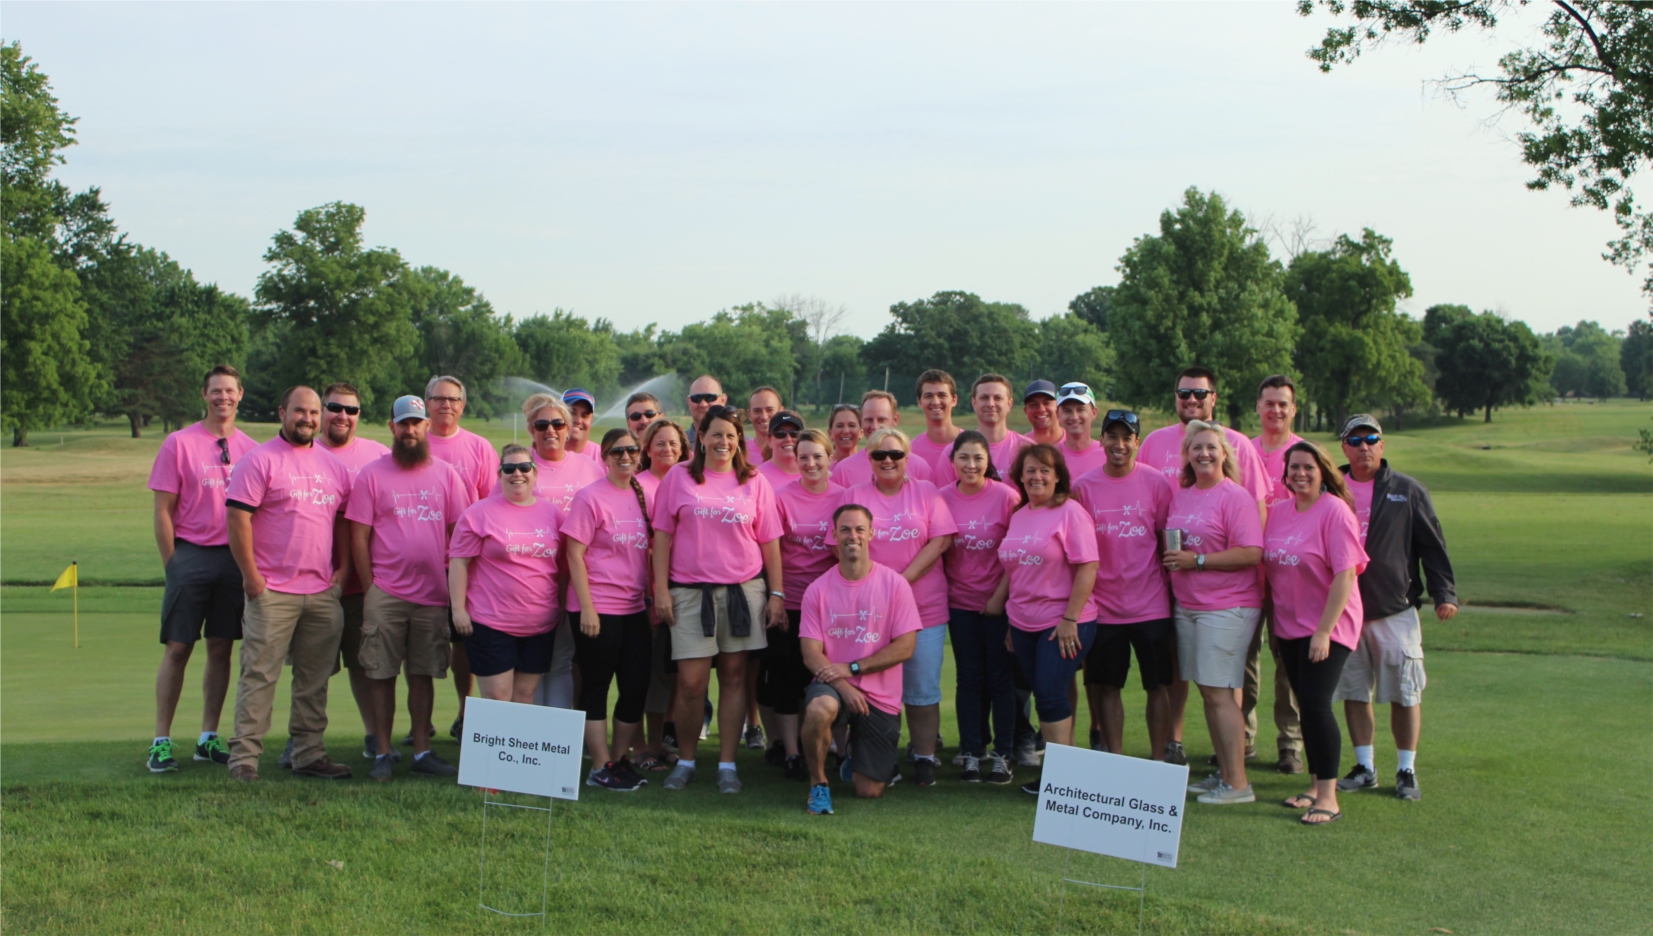 A culture of community - Pepper employees rally to support a coworker's child at a golf outing.